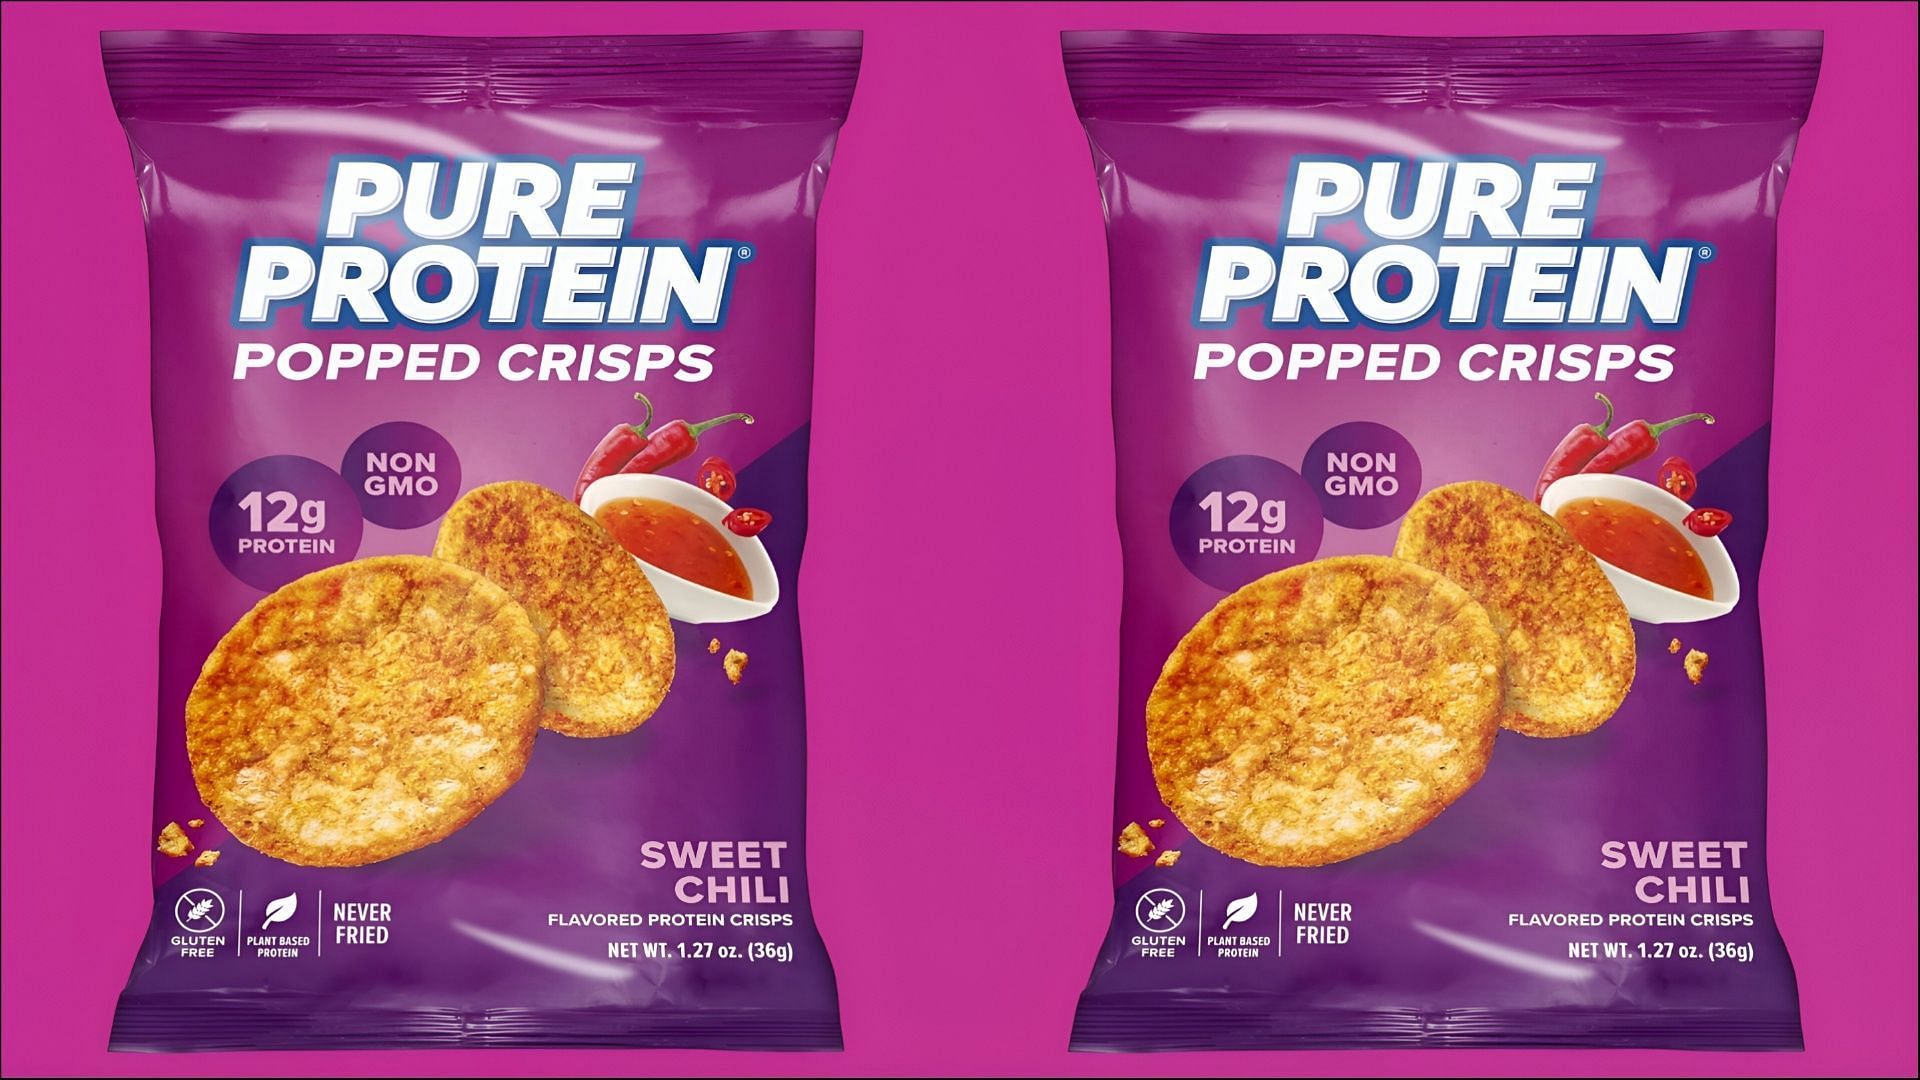 Pure Protein introduces new Sweet Chili Popped Crisps (Image via Amazon)